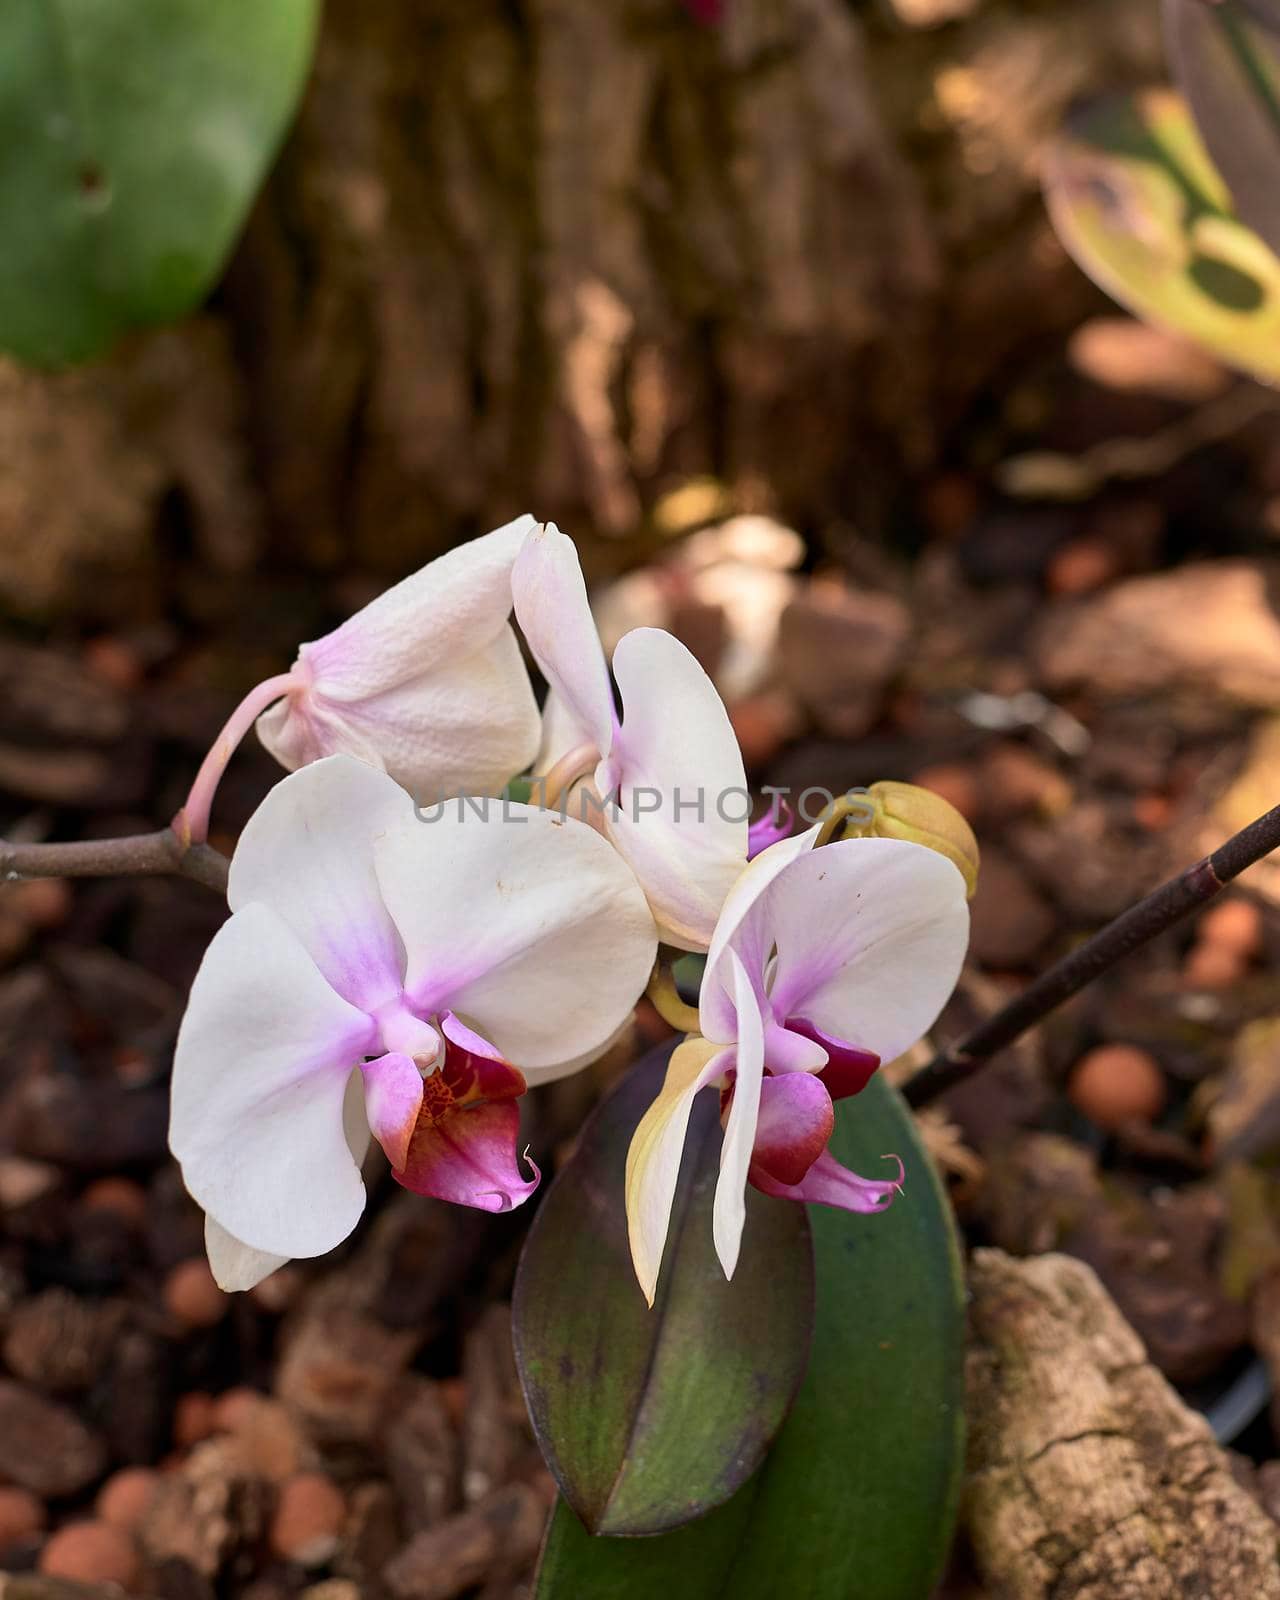 Group of white orchids. Phalaenopsis, blurred background, purple, white, macro photography.